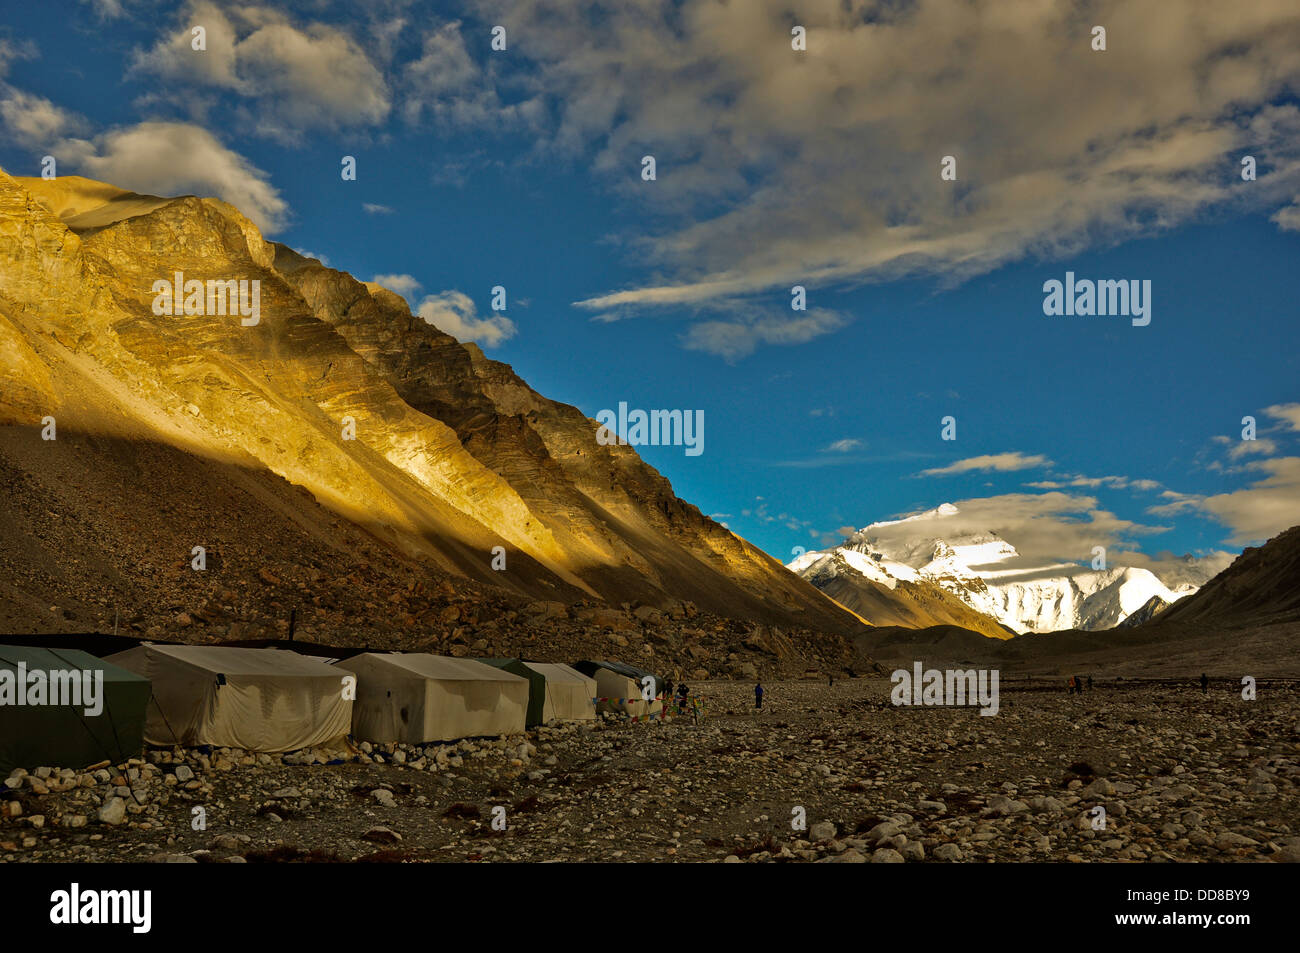 mount everest viewed from Tibet Qomolangma base camp in China Stock Photo